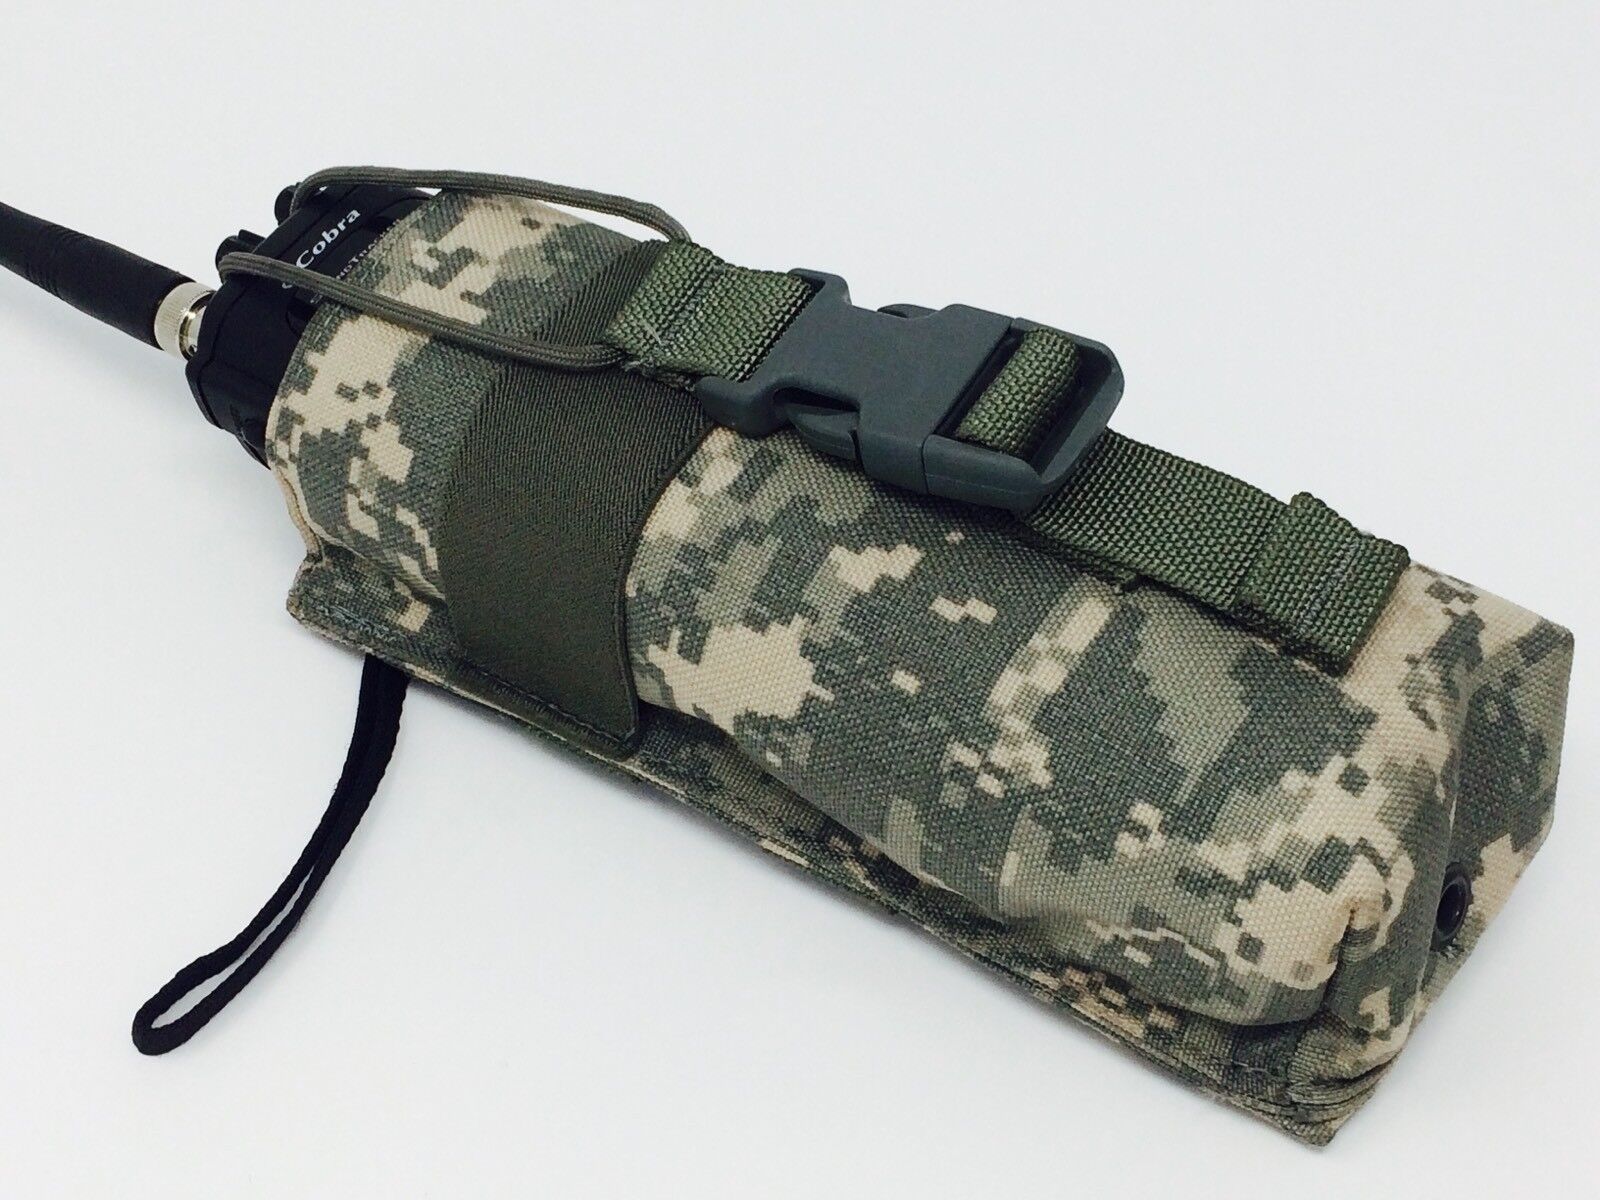 New Initial Attack US Army Military Radio Comms Molle Pouch Digital Camo ACU